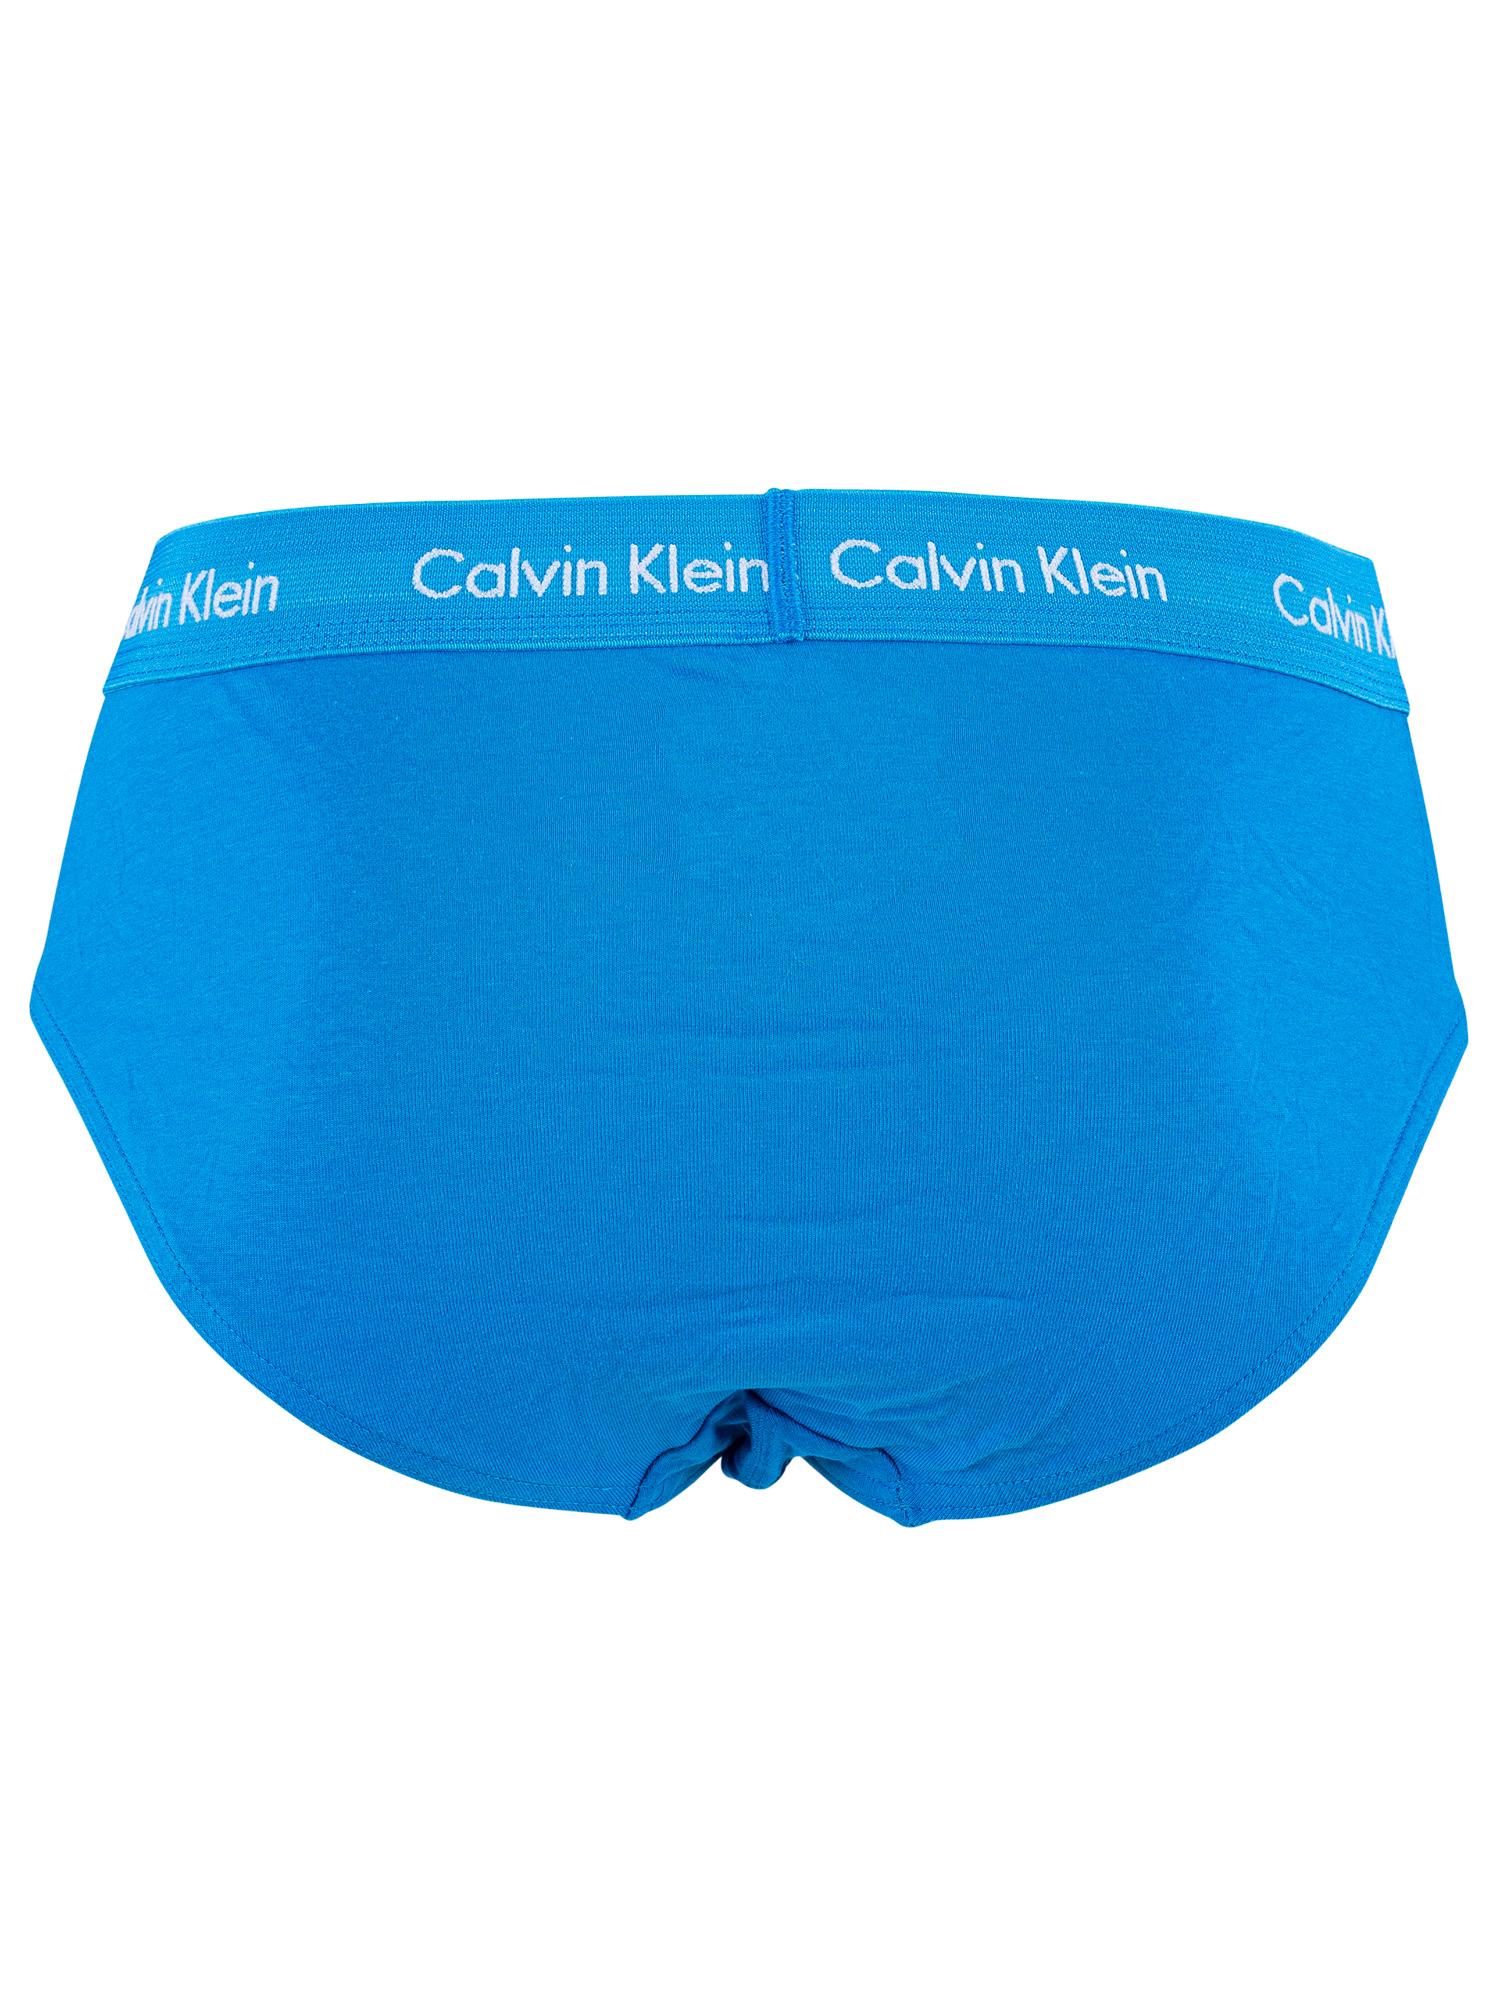 Calvin Klein 5 Pack This Is Love Hip Briefs in Yellow for Men | Lyst